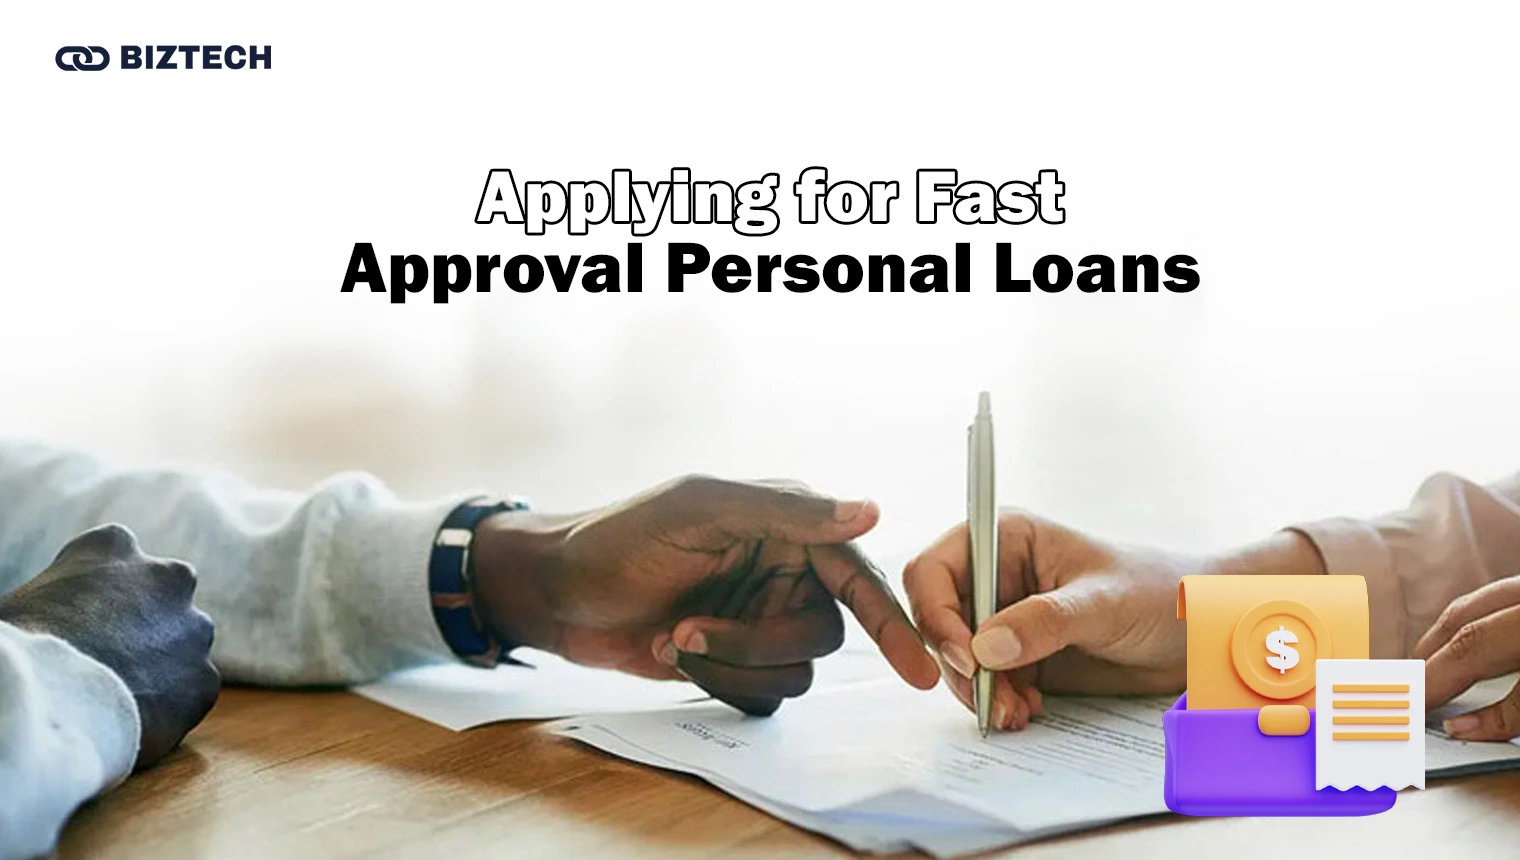 BizTech Community | Personal Finance |Applying for Fast Approval Personal Loans